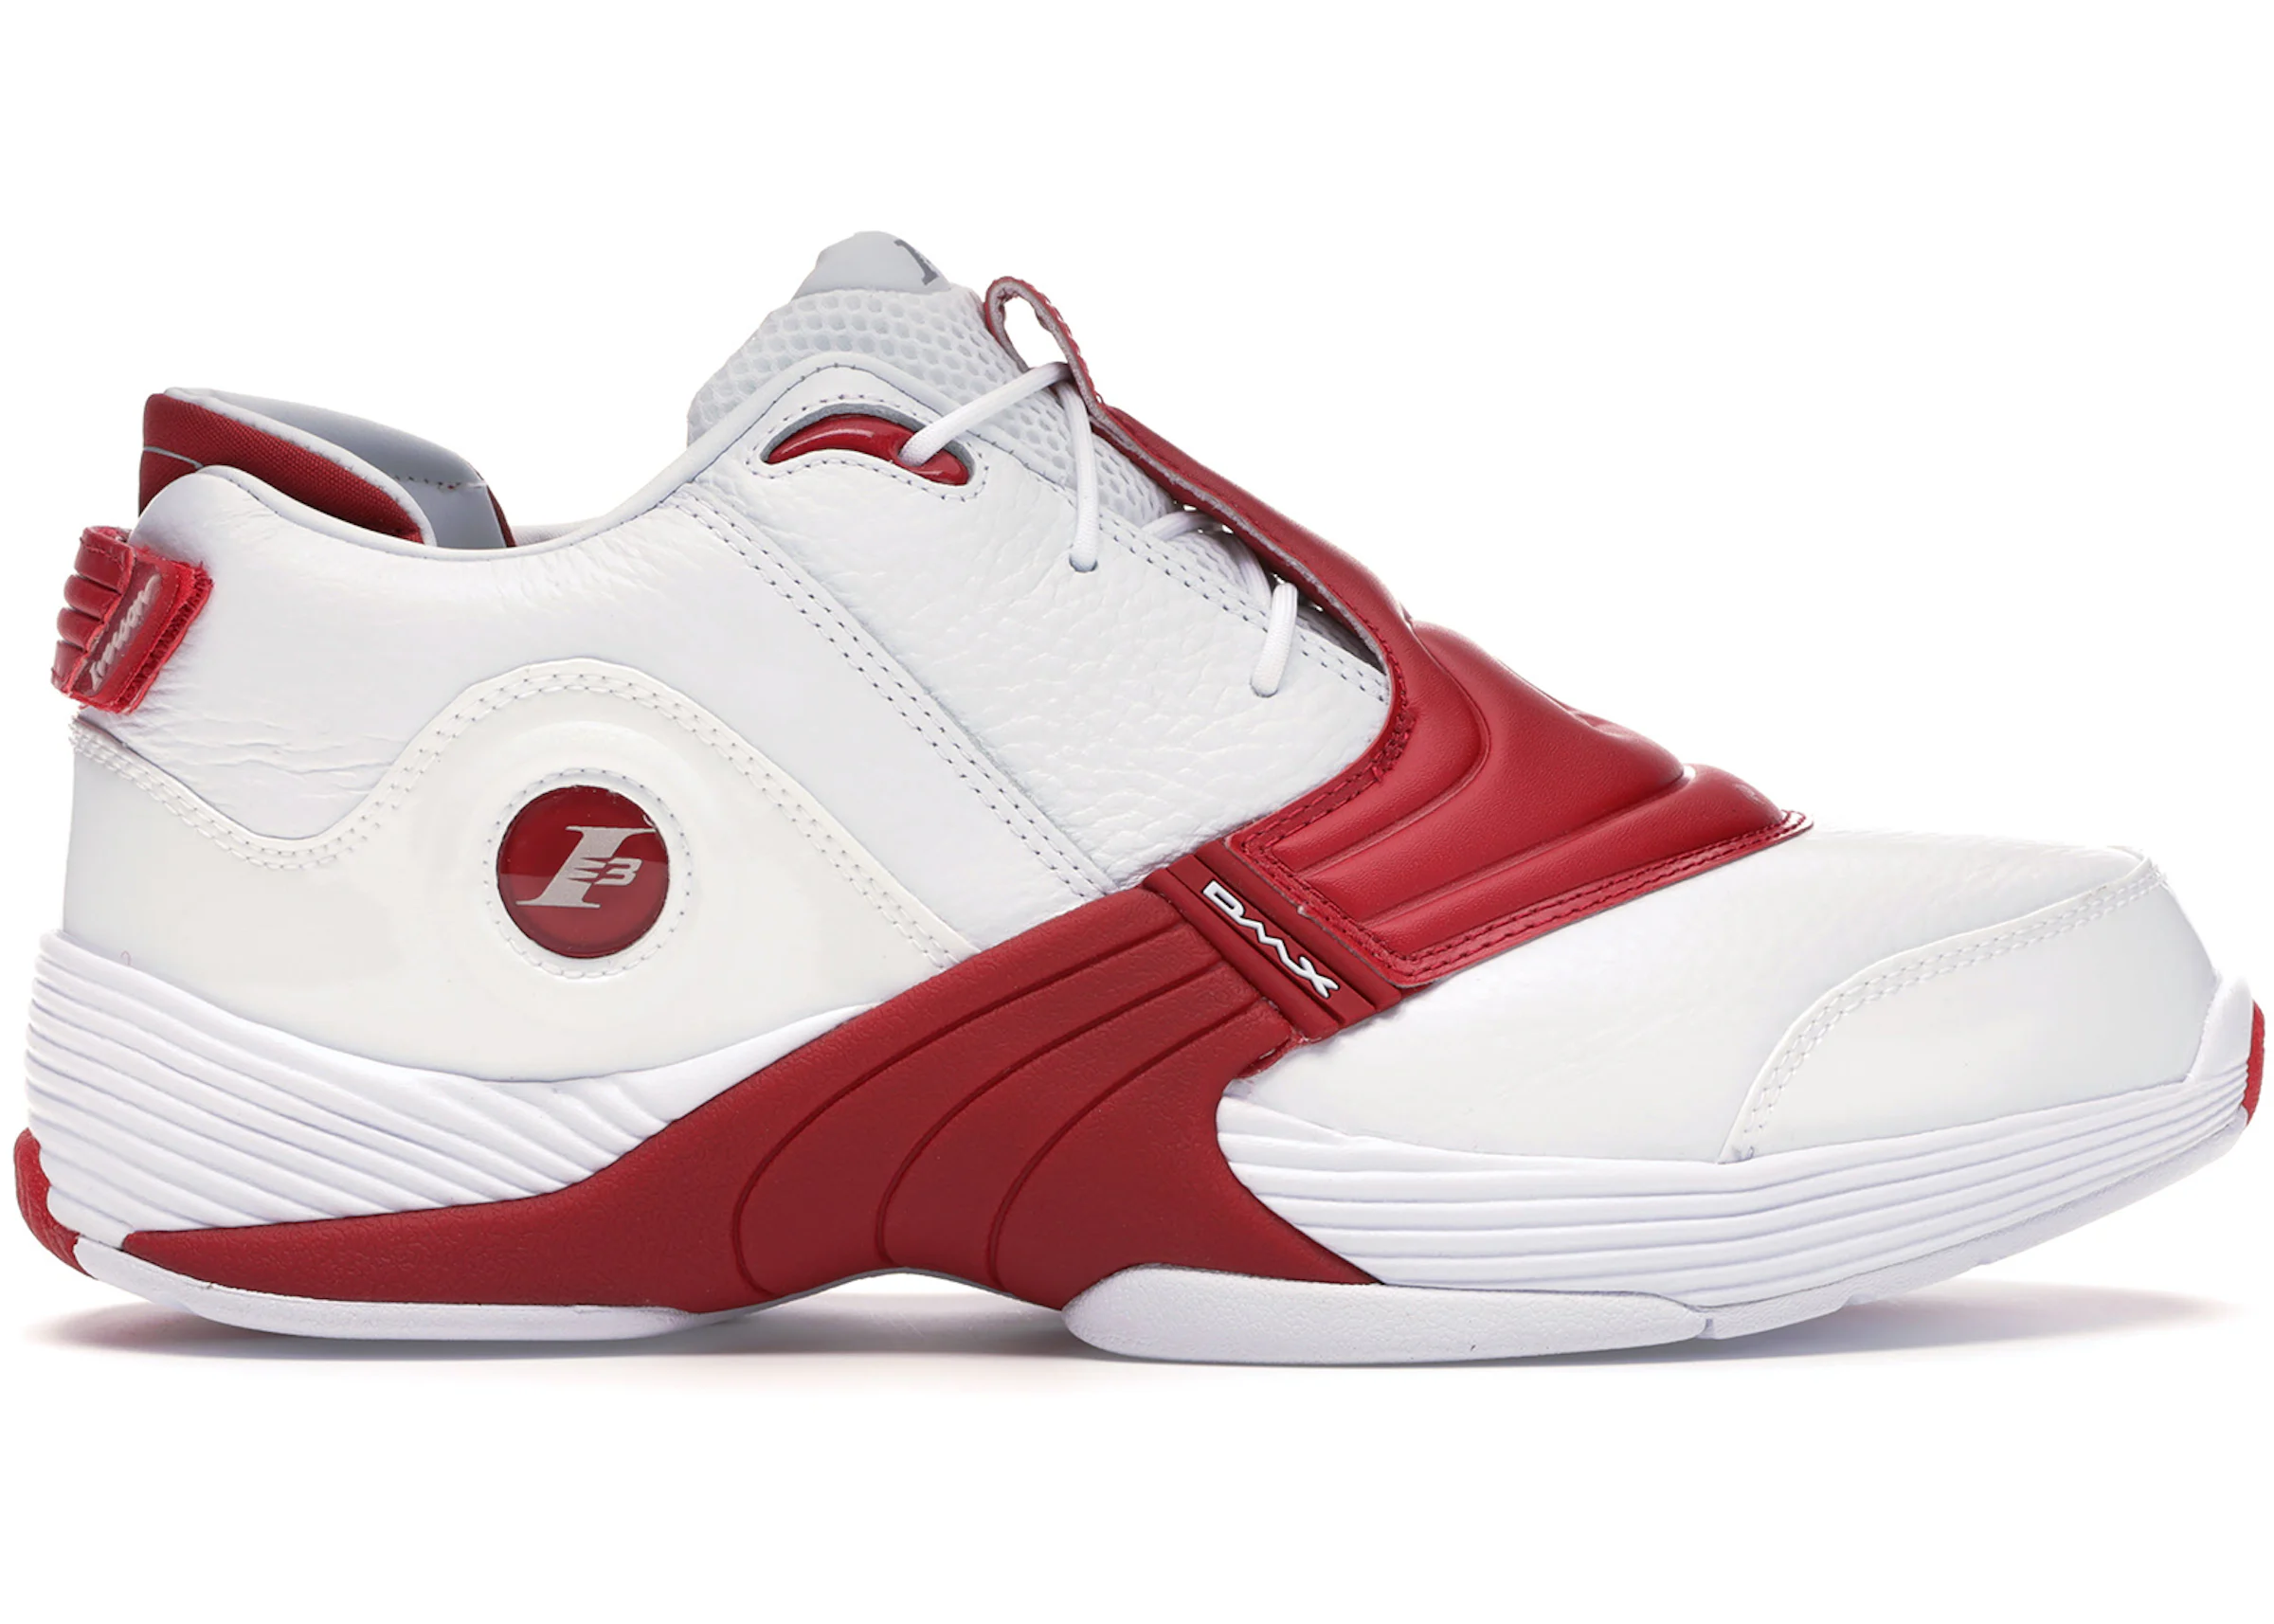 Reebok-Answer-5-White-Red-2019-Product.jpg